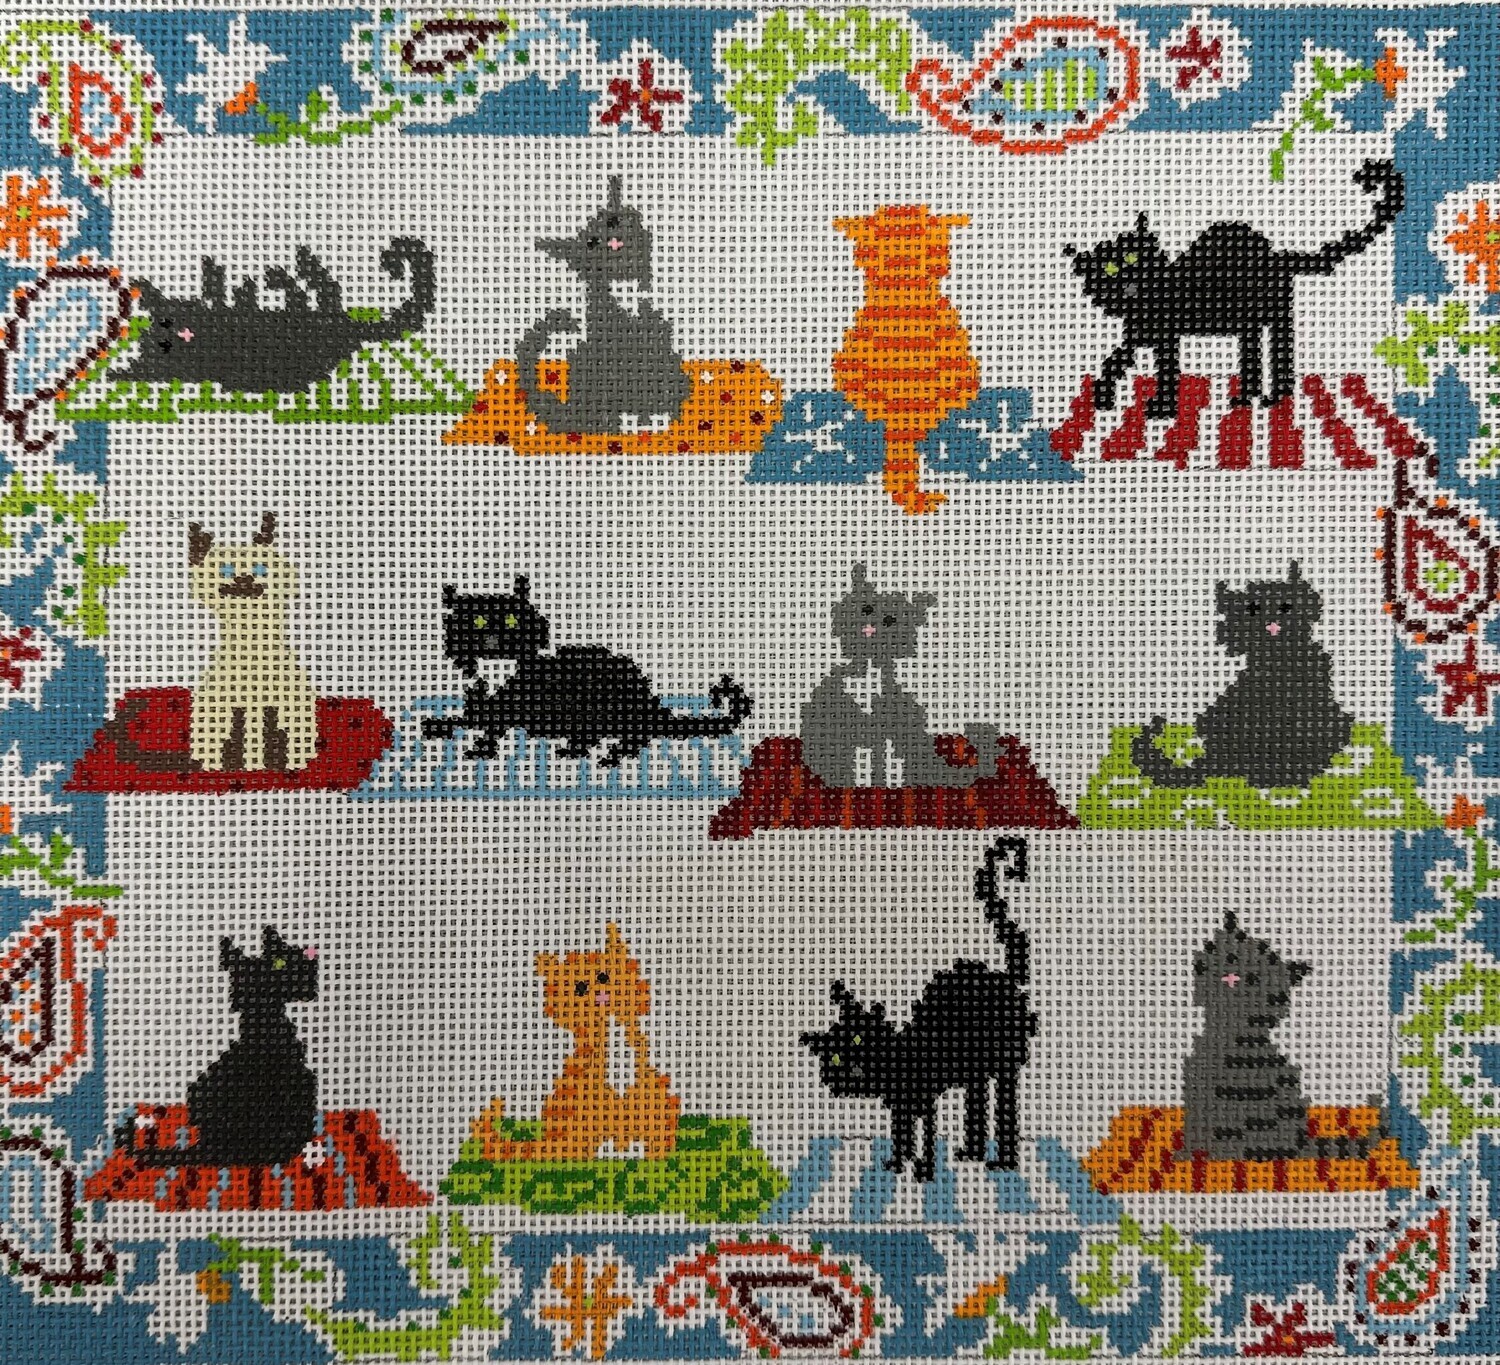 12 CATS Handpainted Needlepoint by Pippin